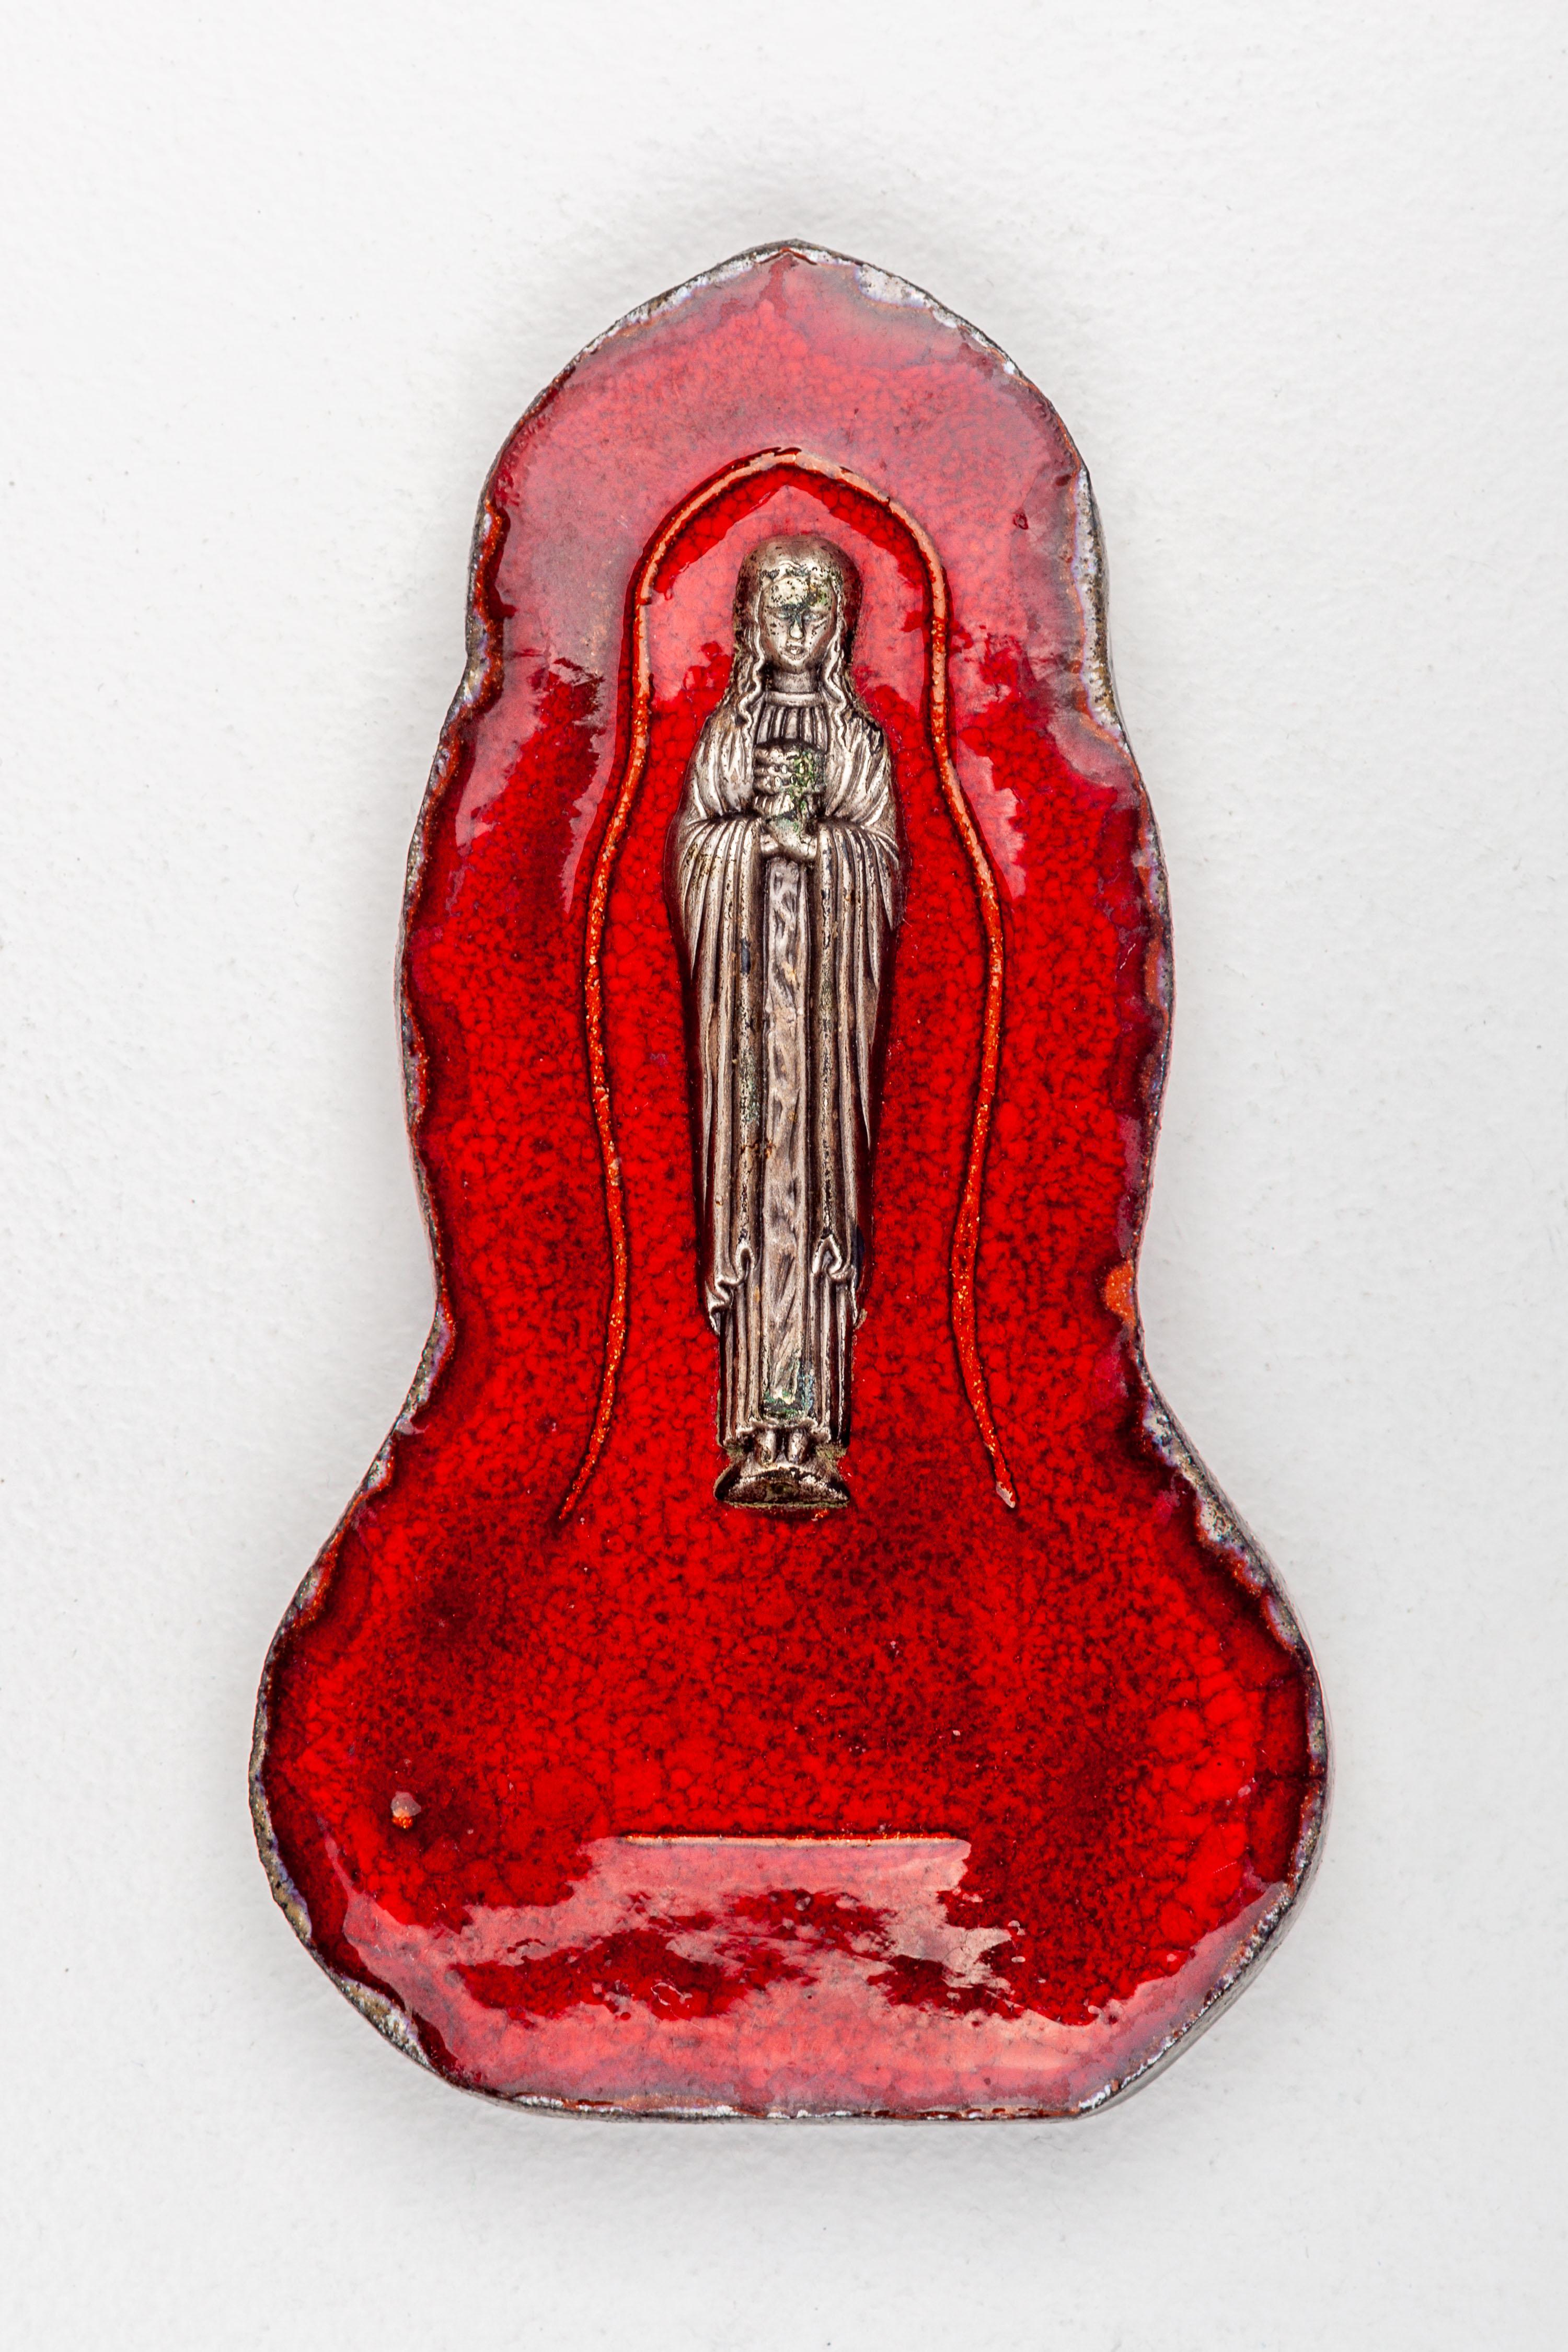 Midcentury Ceramic Wall Plaque with Metal Virgin Mary, European Studio Pottery For Sale 3